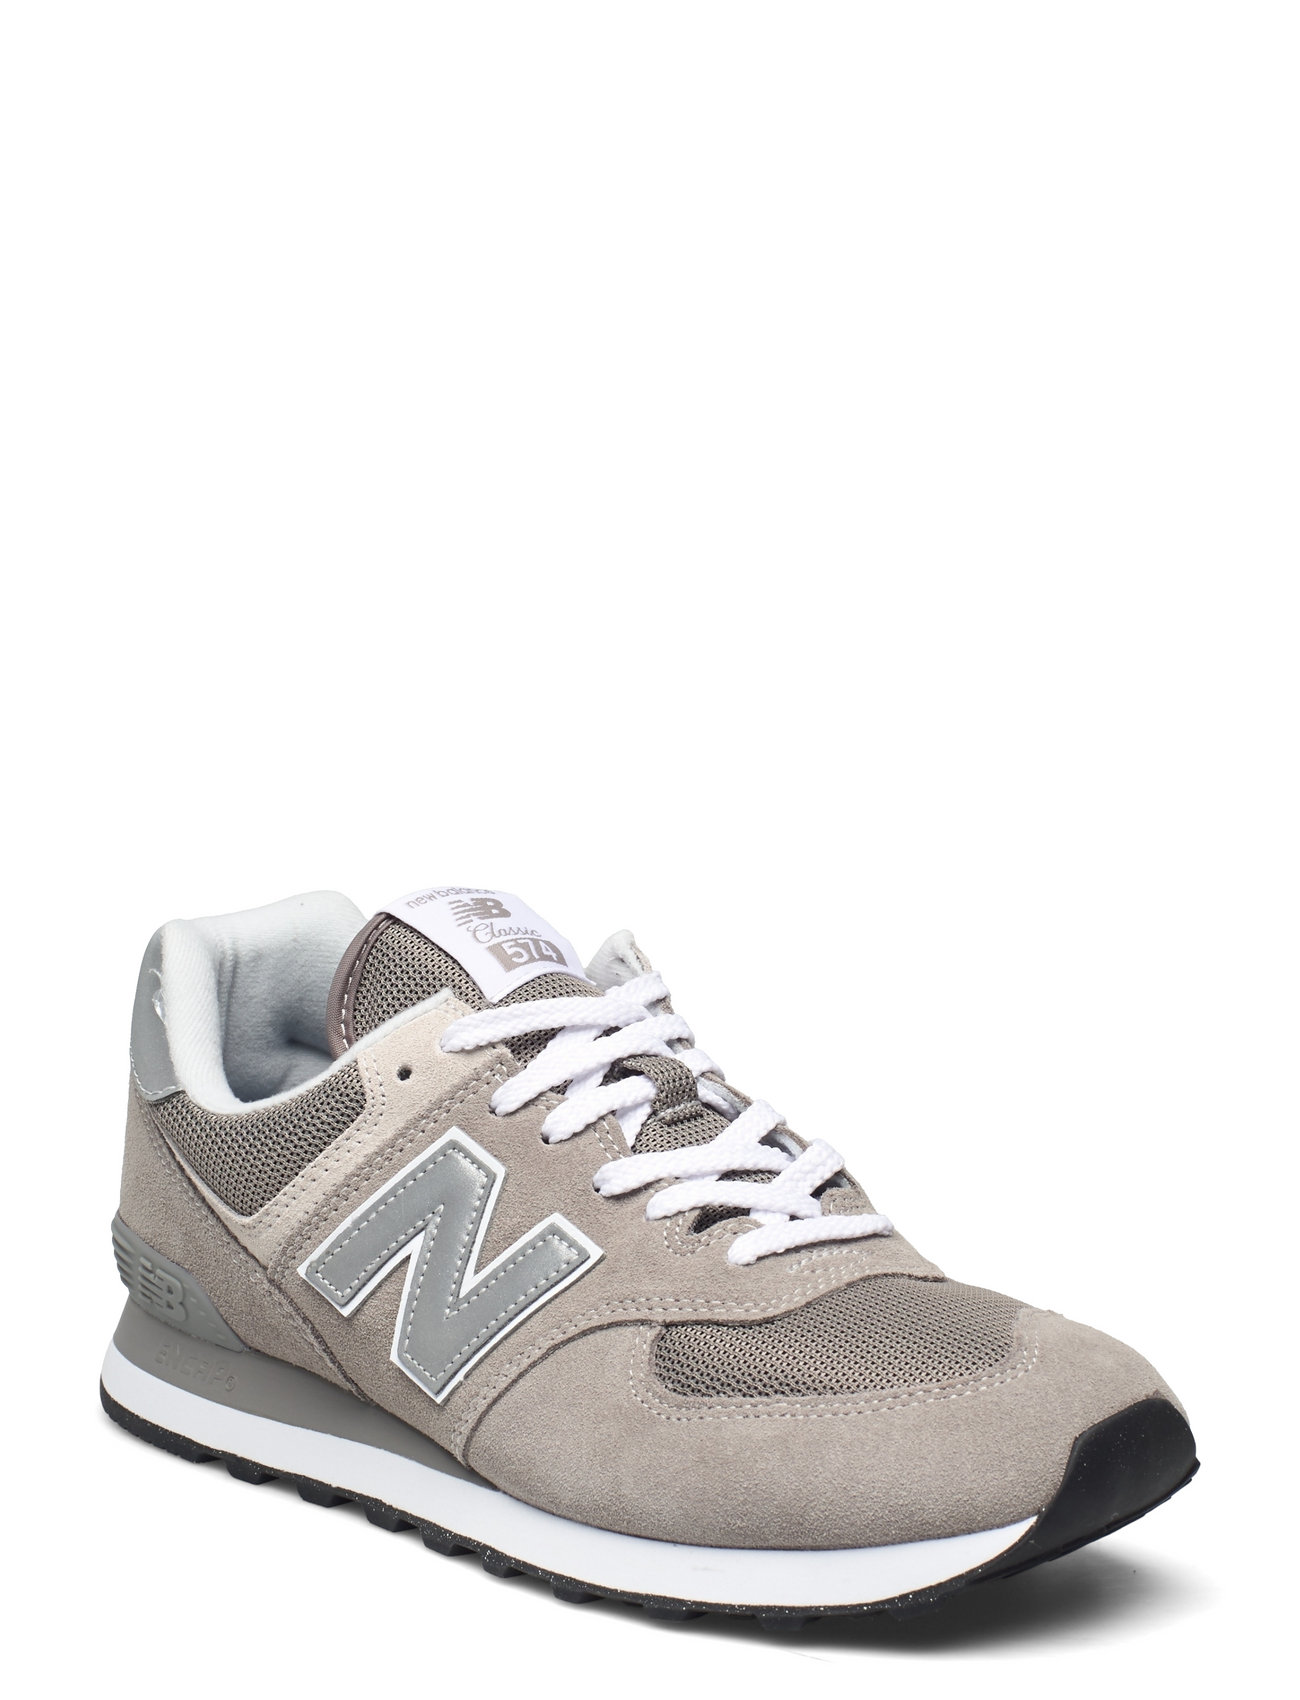 New Balance 574 Sport Sneakers Low-top Sneakers Grey New Balance